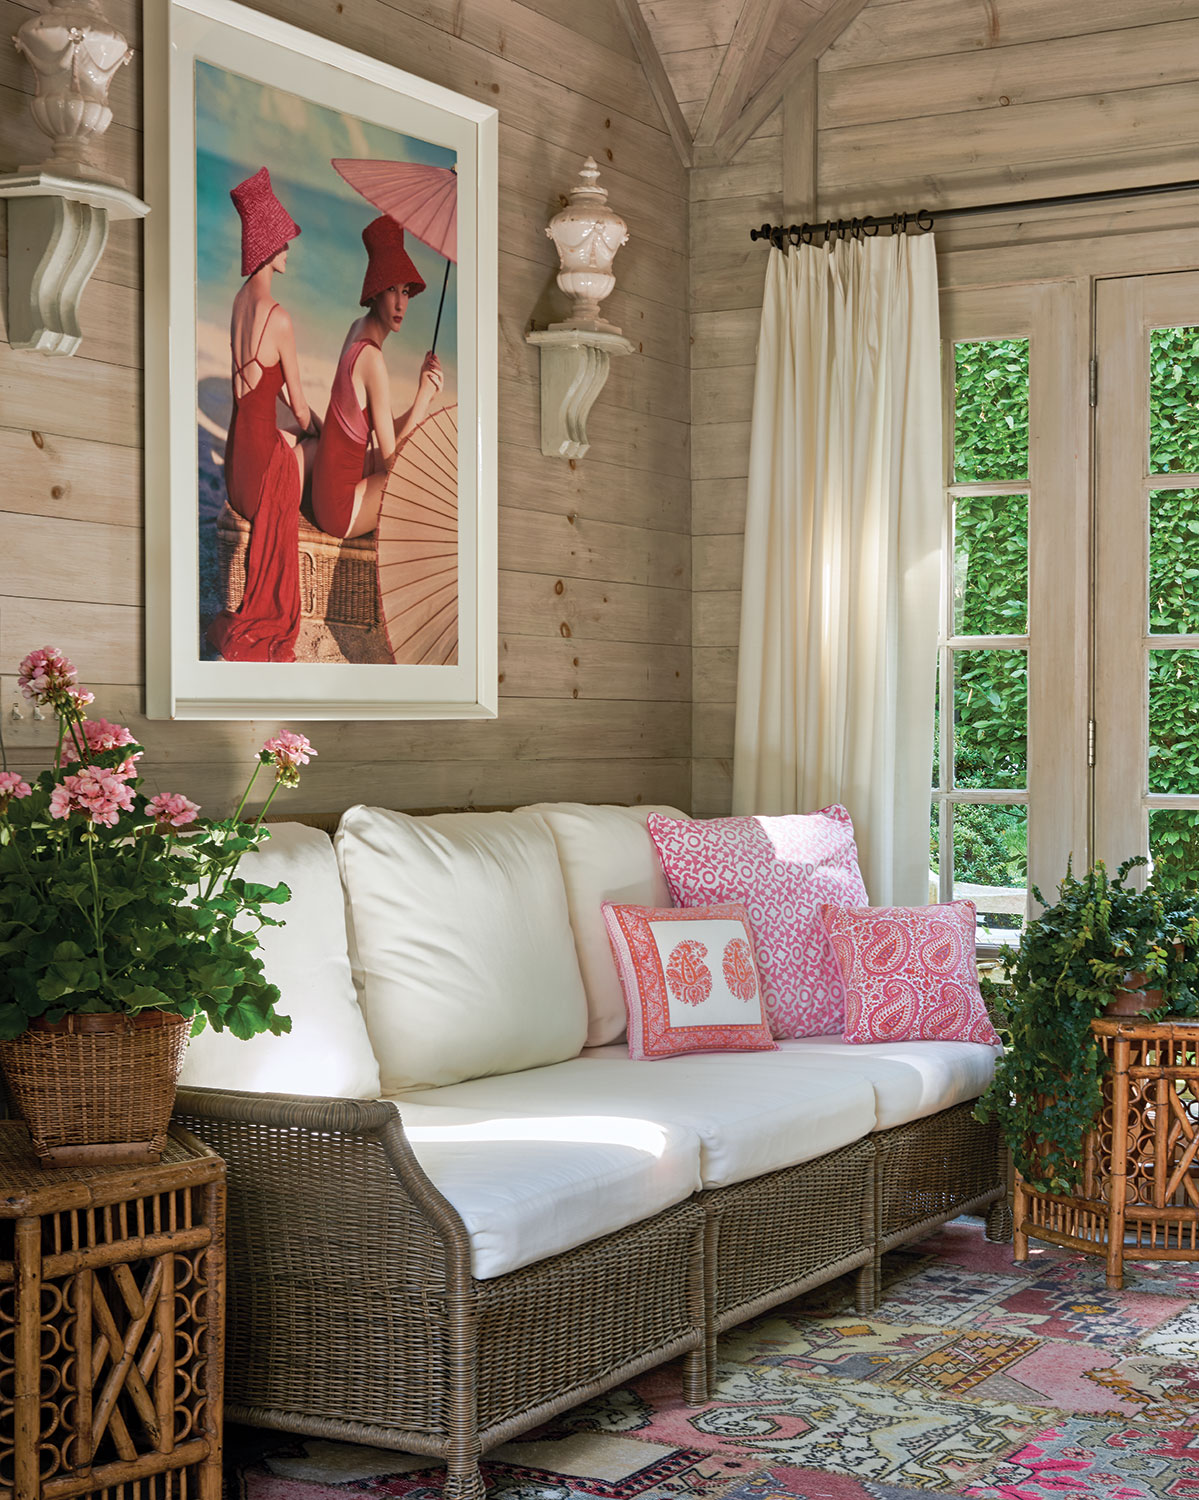 The pool house features pops of pink and a photograph by fashion photographer Louise Dahl-Wolfe.